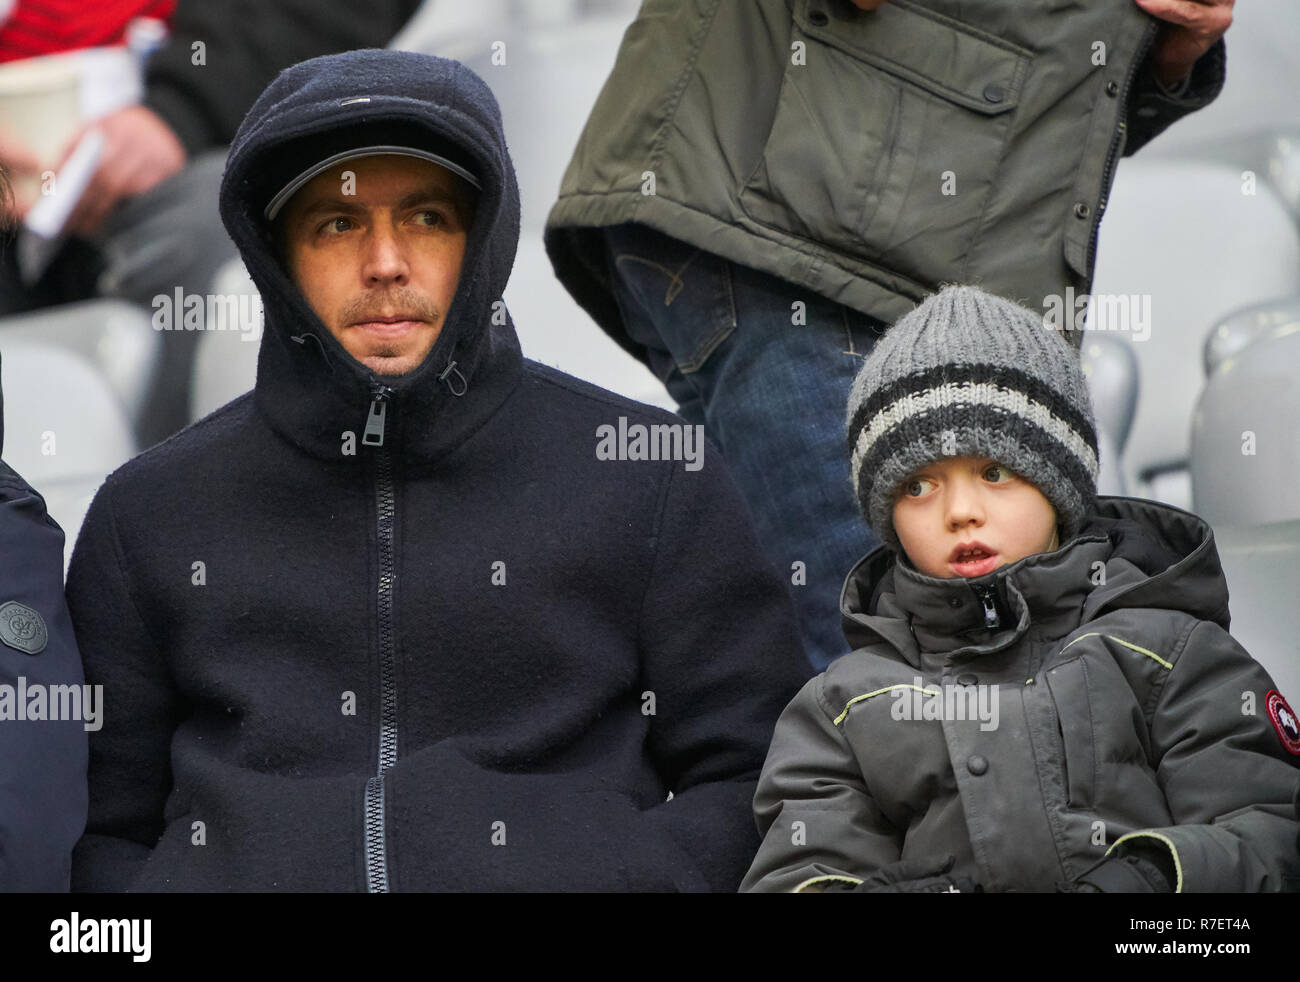 Munich, Germany. 8th December 2018. former FCB player, DFB captain Philipp LAHM with son Julian  FC BAYERN MUNICH - 1.FC NUREMBERG 3-0  - DFL REGULATIONS PROHIBIT ANY USE OF PHOTOGRAPHS as IMAGE SEQUENCES and/or QUASI-VIDEO -  1.German Soccer League , Munich, December 08, 2018  Season 2018/2019, matchday 14, FCB, 1.FC Nürnberg © Peter Schatz / Alamy Live News Stock Photo